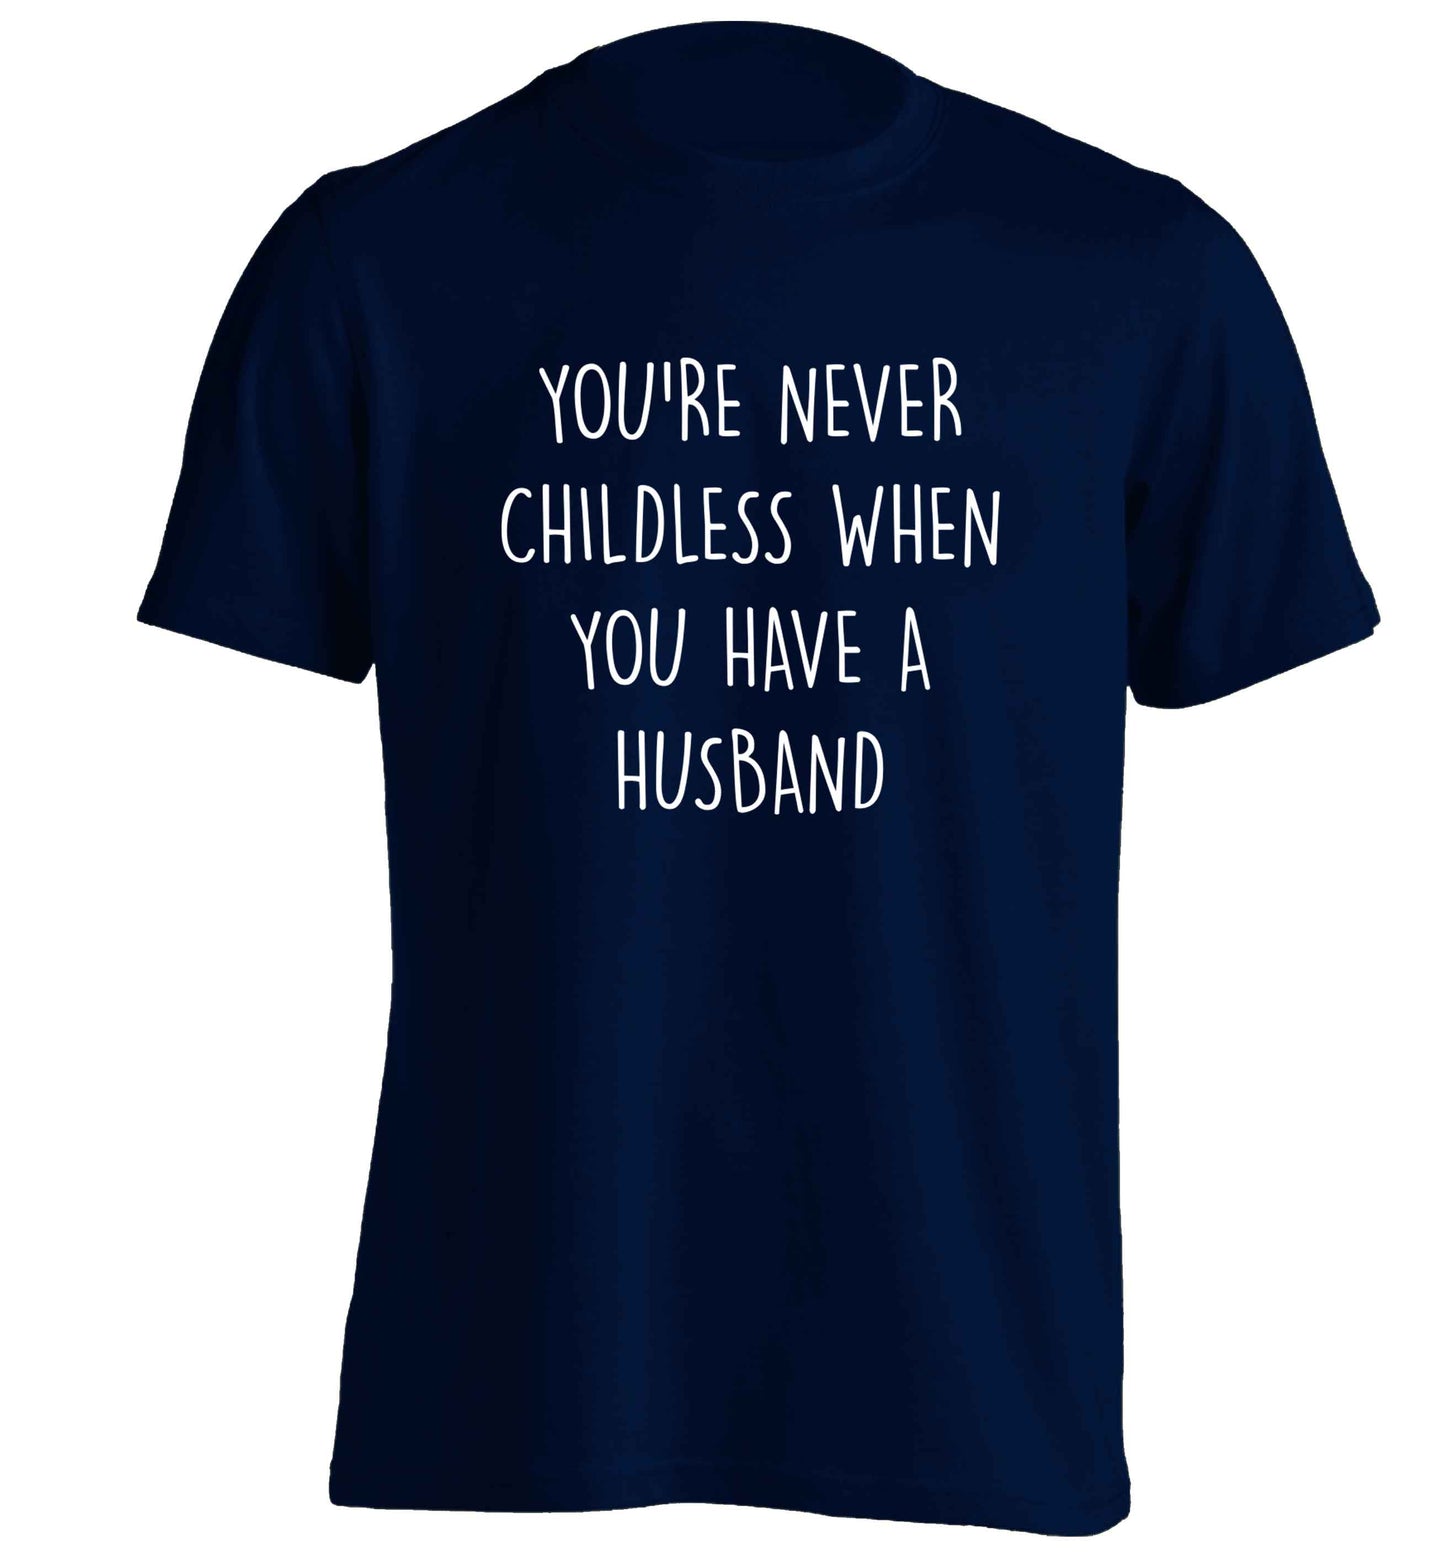 You're never childess when you have a husband adults unisex navy Tshirt 2XL